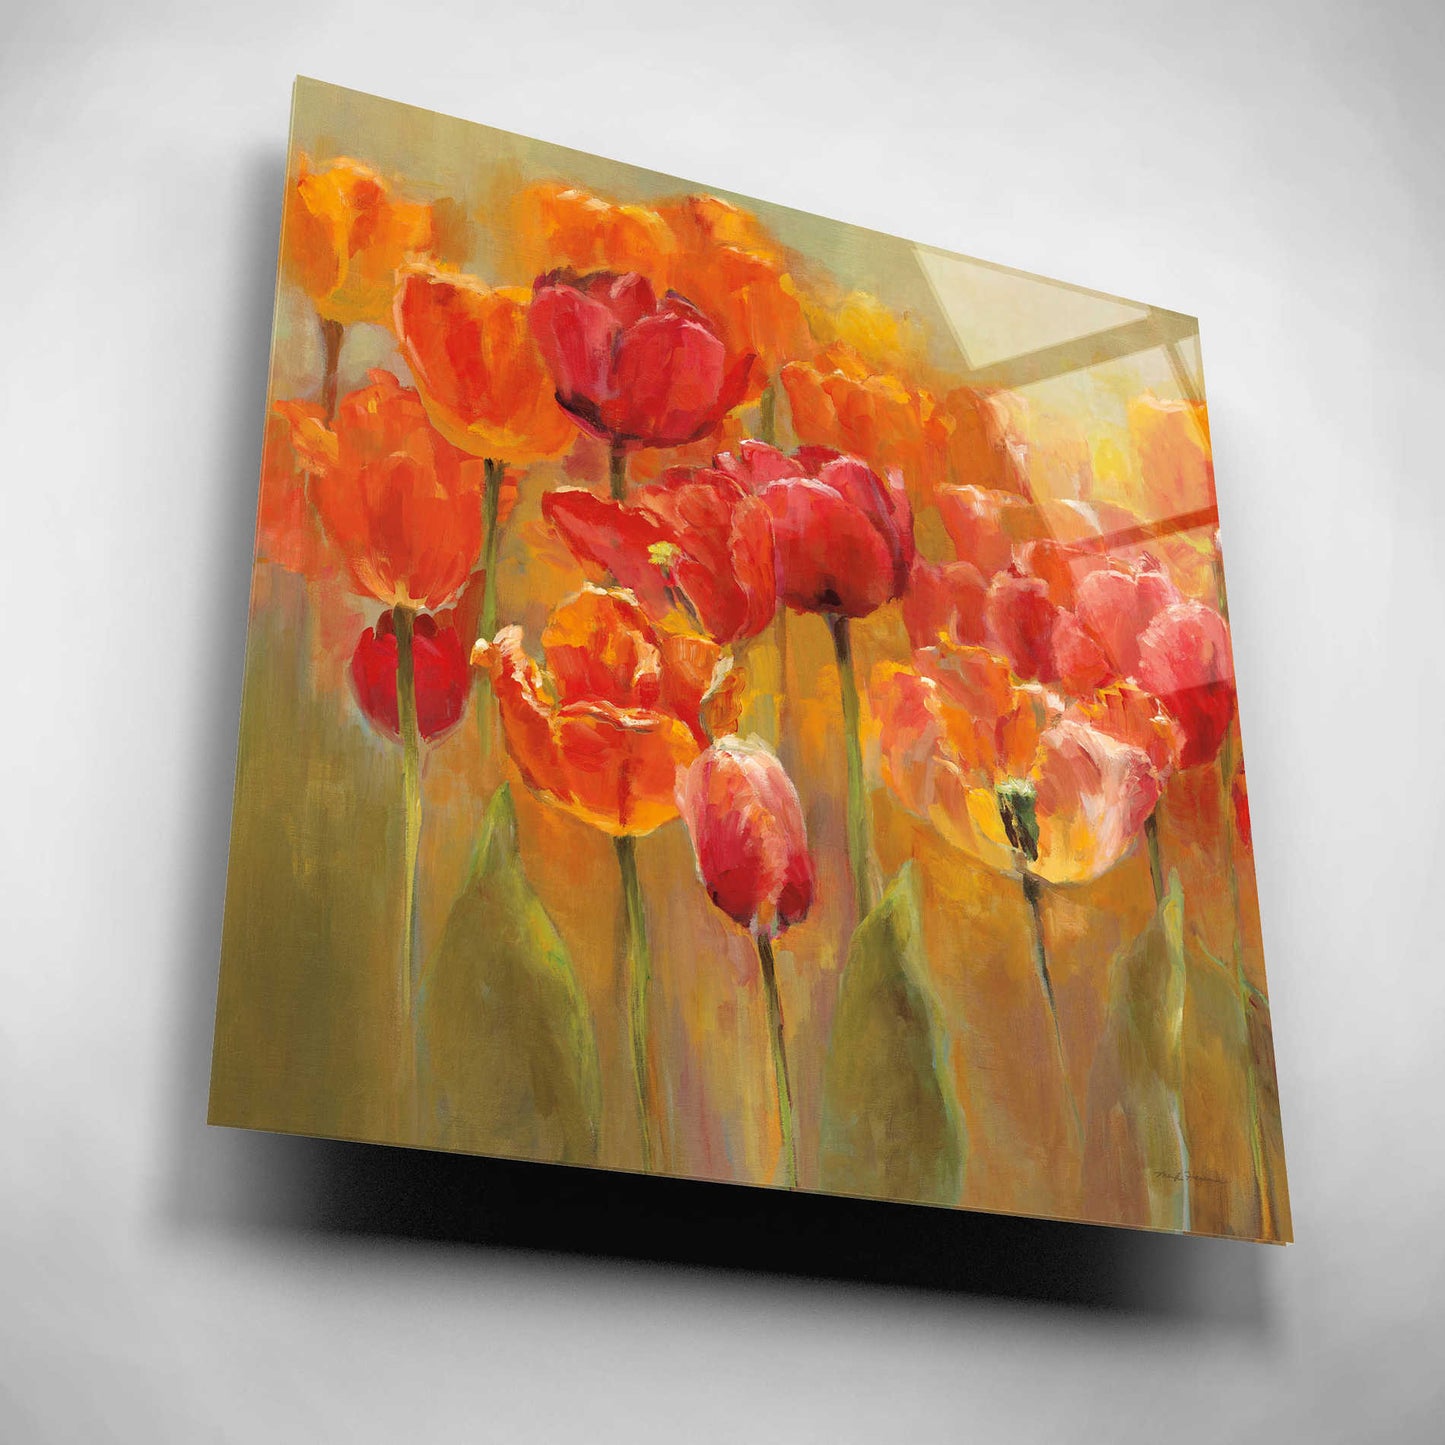 Epic Art 'Tulips in the Midst III Square' by Marilyn Hageman, Acrylic Glass Wall Art,12x12